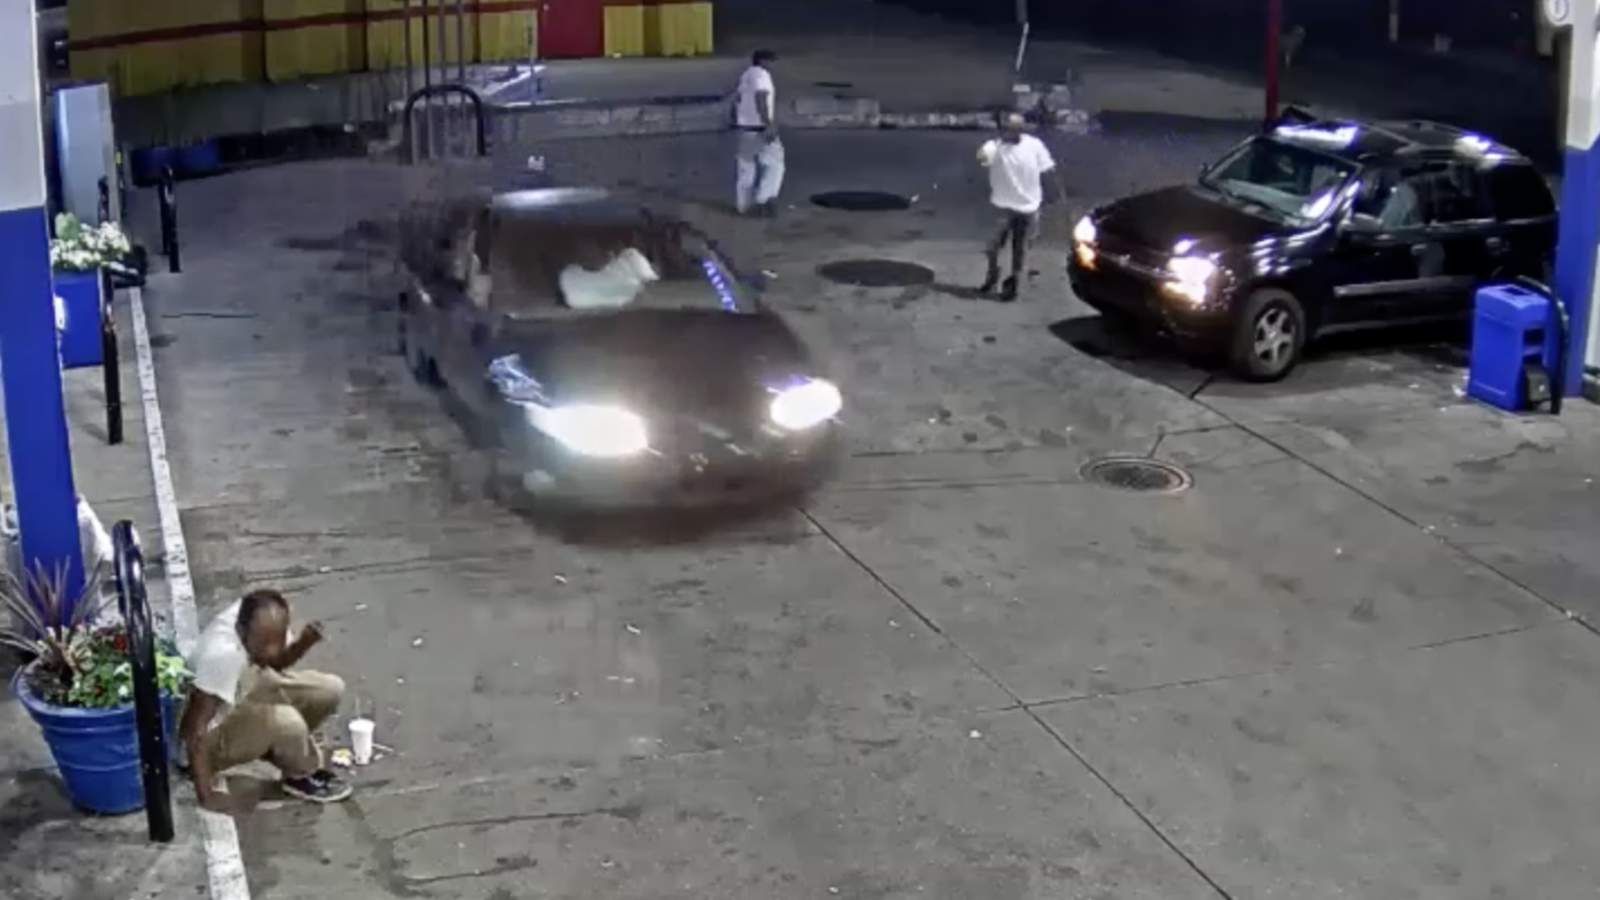 Police seek suspect, 2 persons of interest in gas station shooting